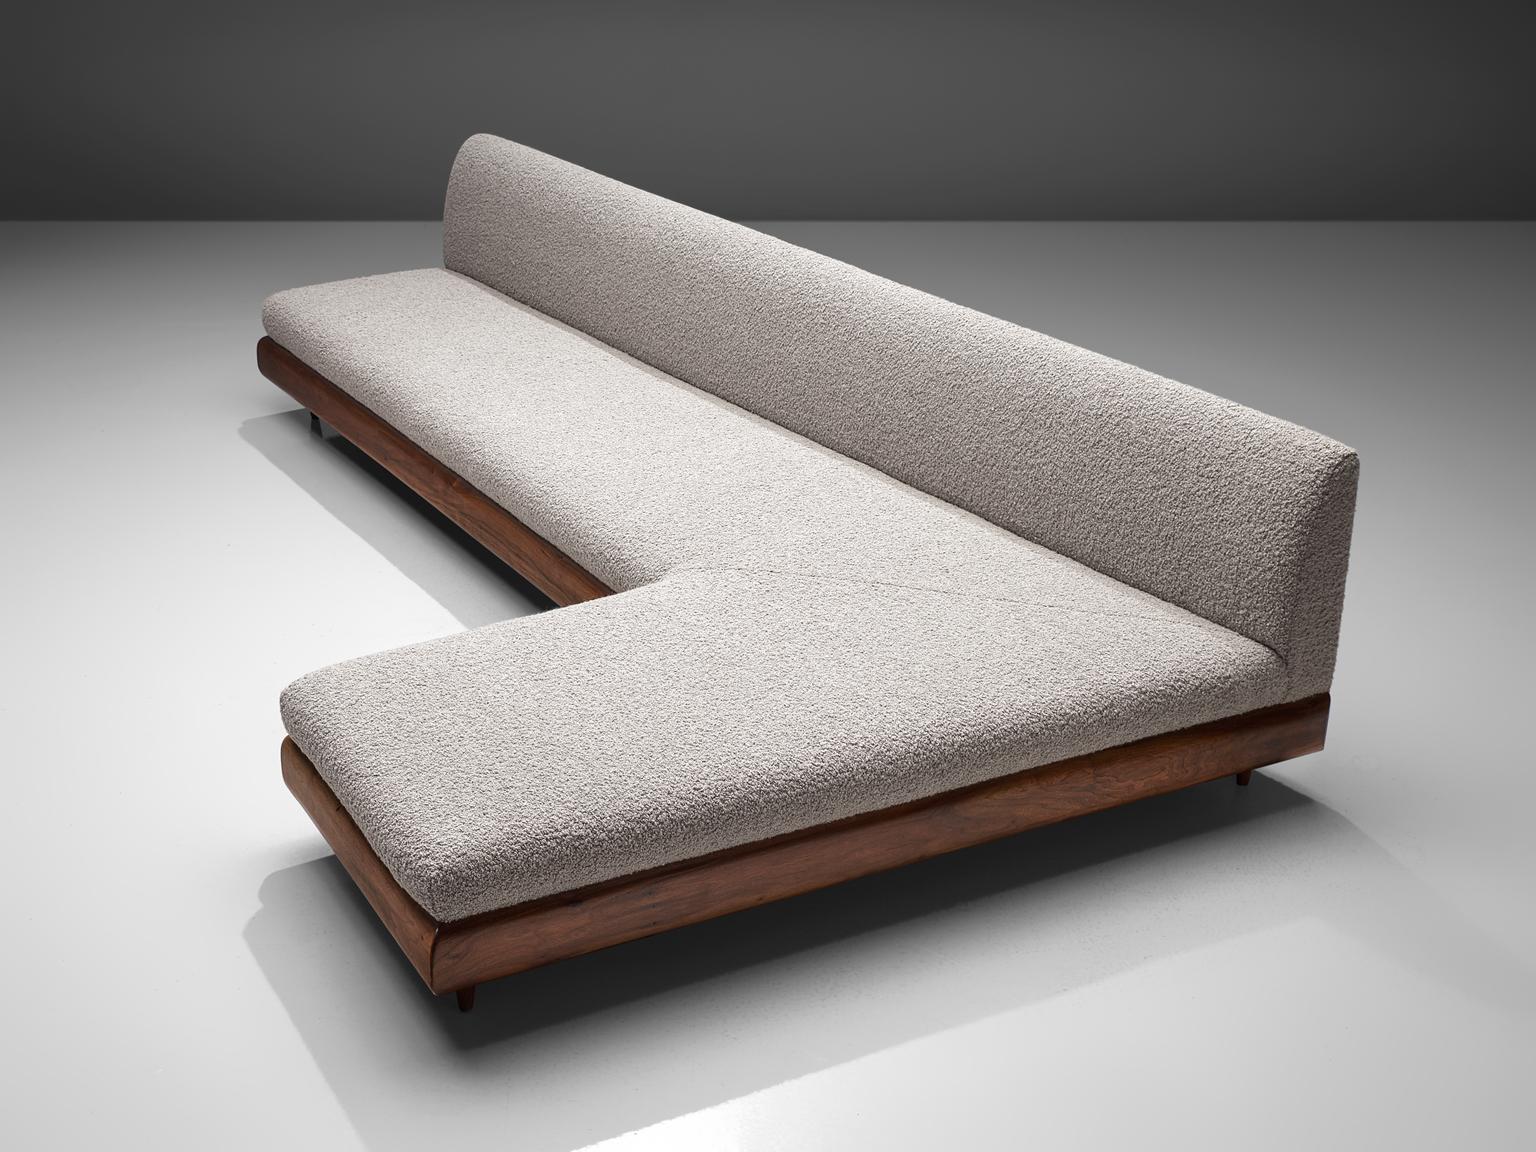 Adrian Pearsall, 'Boomerang' sofa, in Pierre Frey fabric and walnut, United States, 1960s

This boomerang sofa has a unique shape with sinuous lines which create a monumental and inviting look. The sofa is a great addition to a living area or